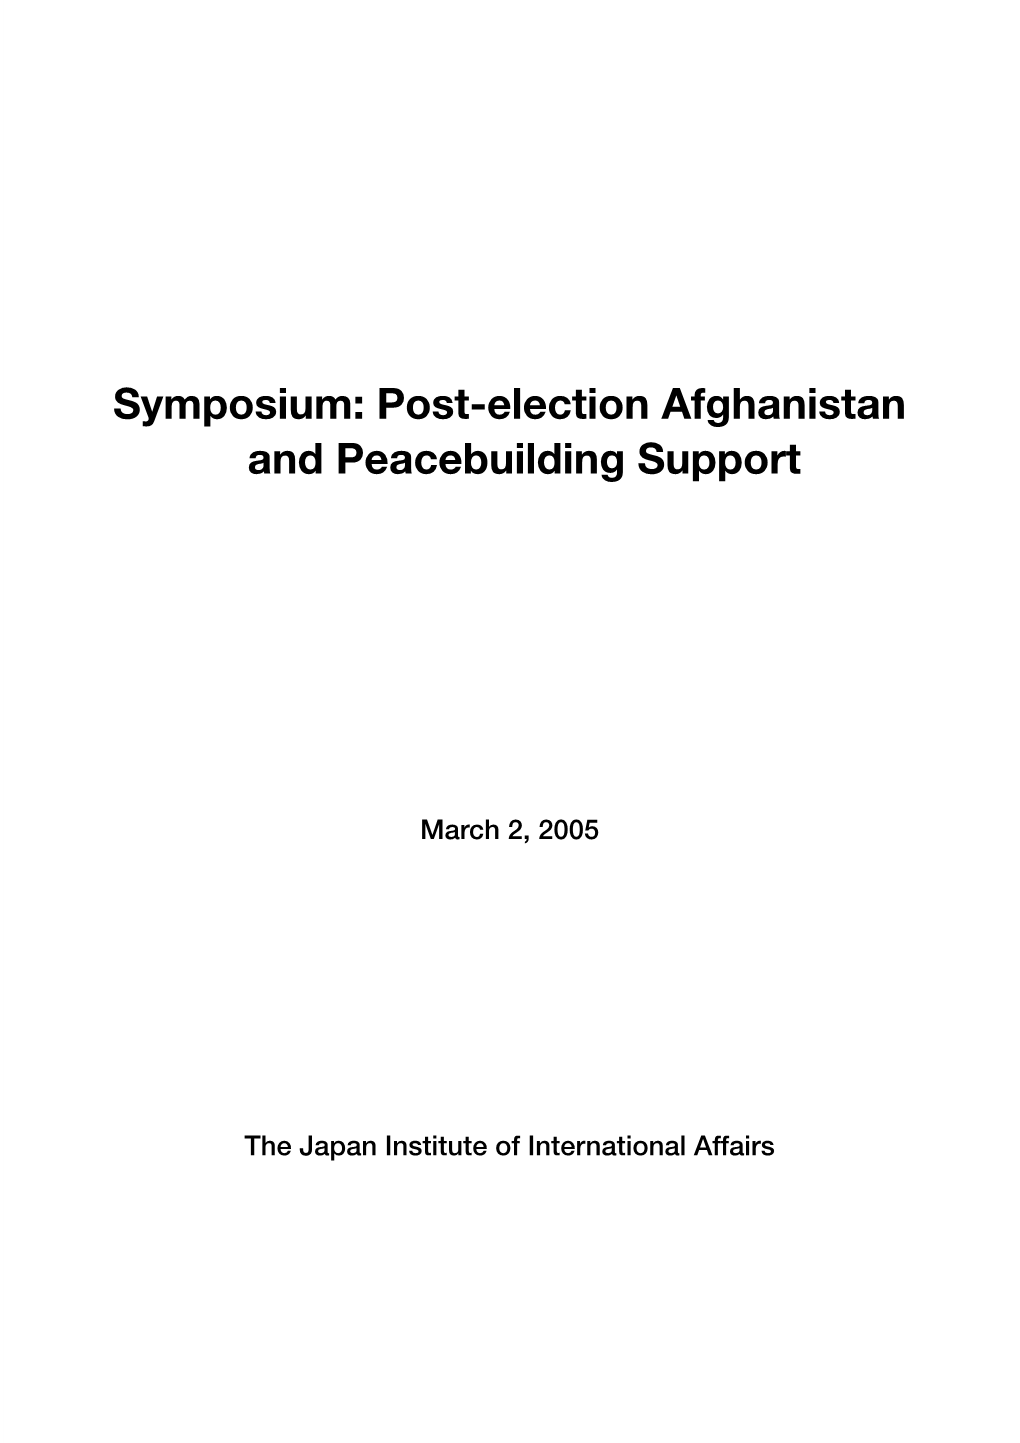 Symposium: Post-Election Afghanistan and Peacebuilding Support